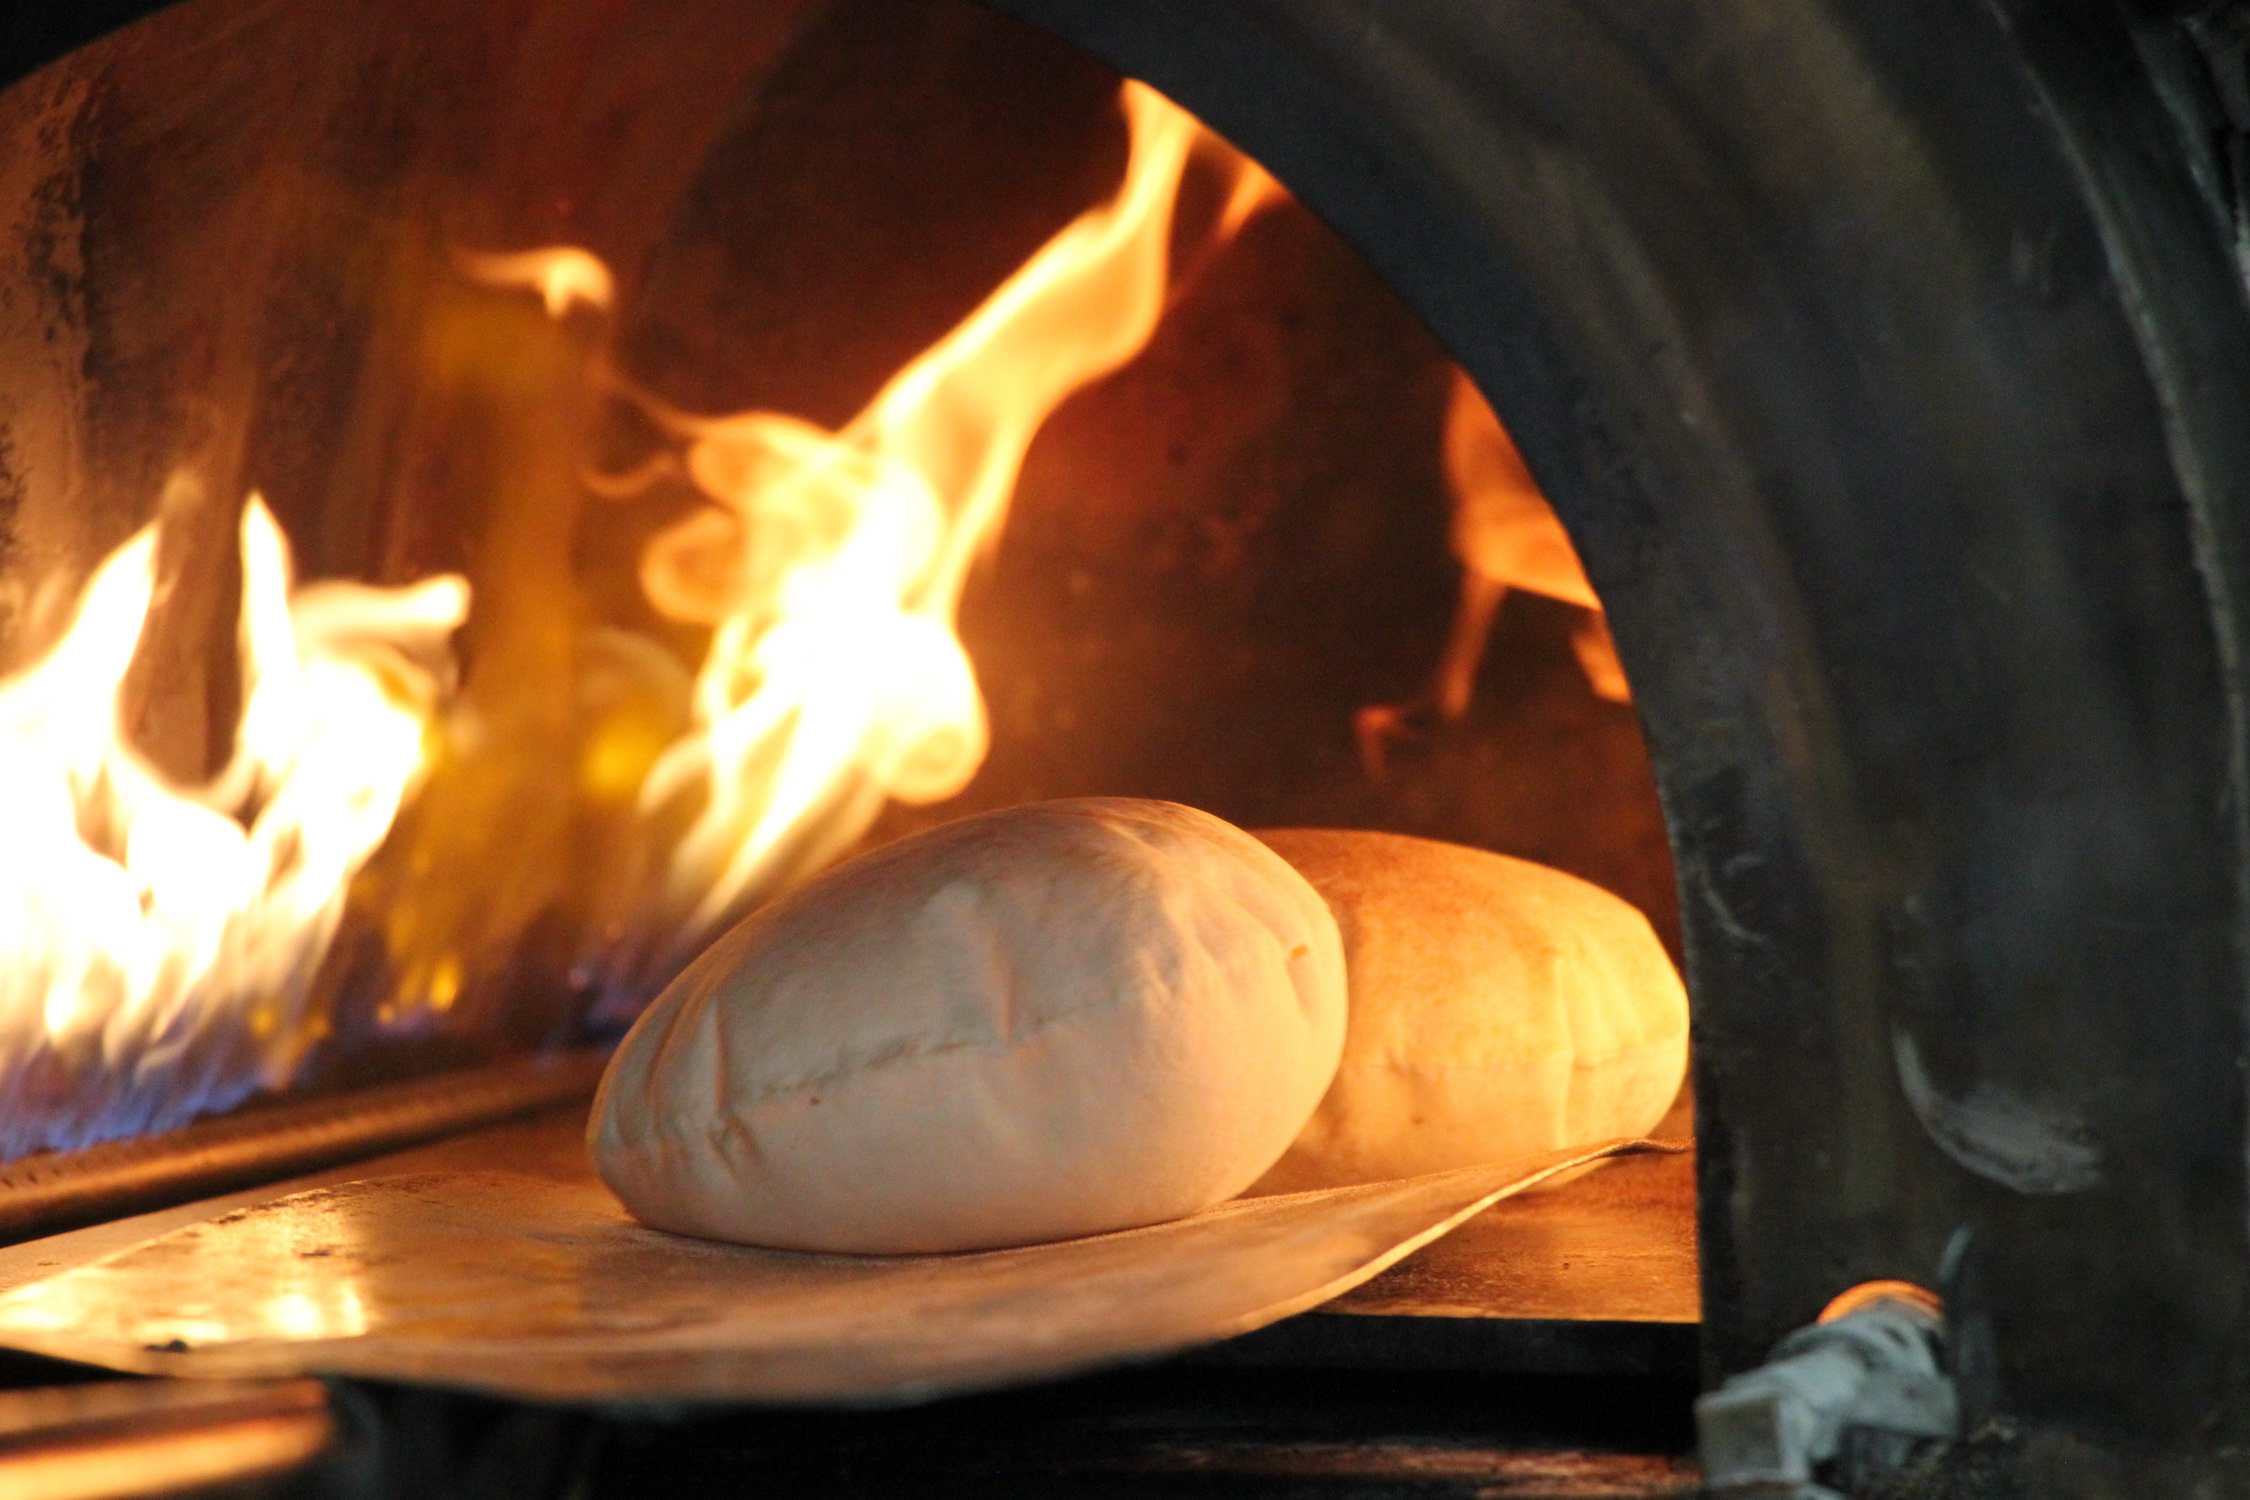 Fire inflates pita bread in the oven. Photo: Dong Nguyen / Tuoi Tre News